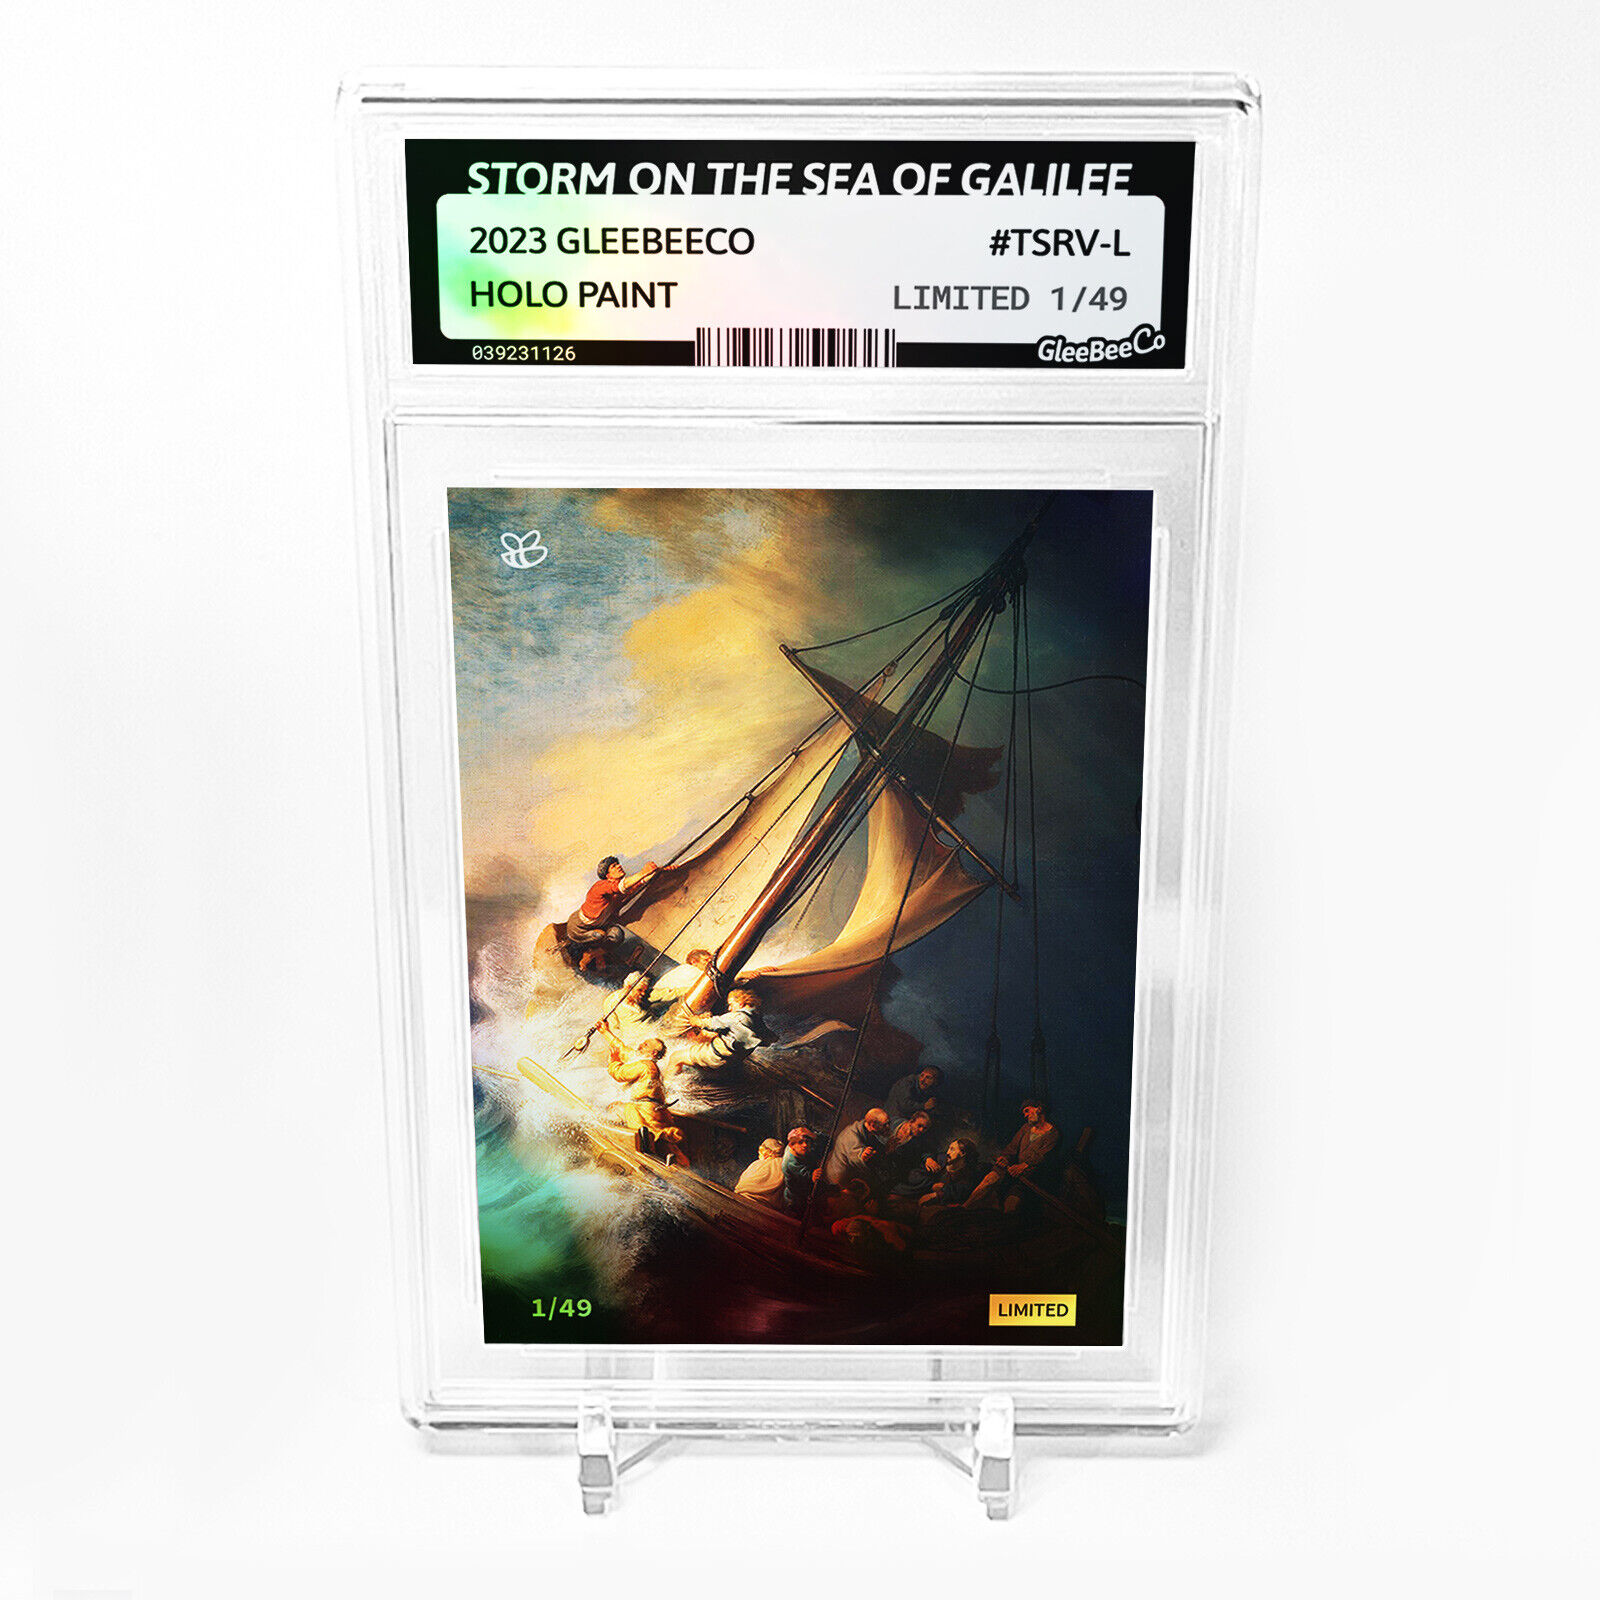 THE STORM ON THE SEA OF GALILEE Card GleeBeeCo #TSRV-L /49